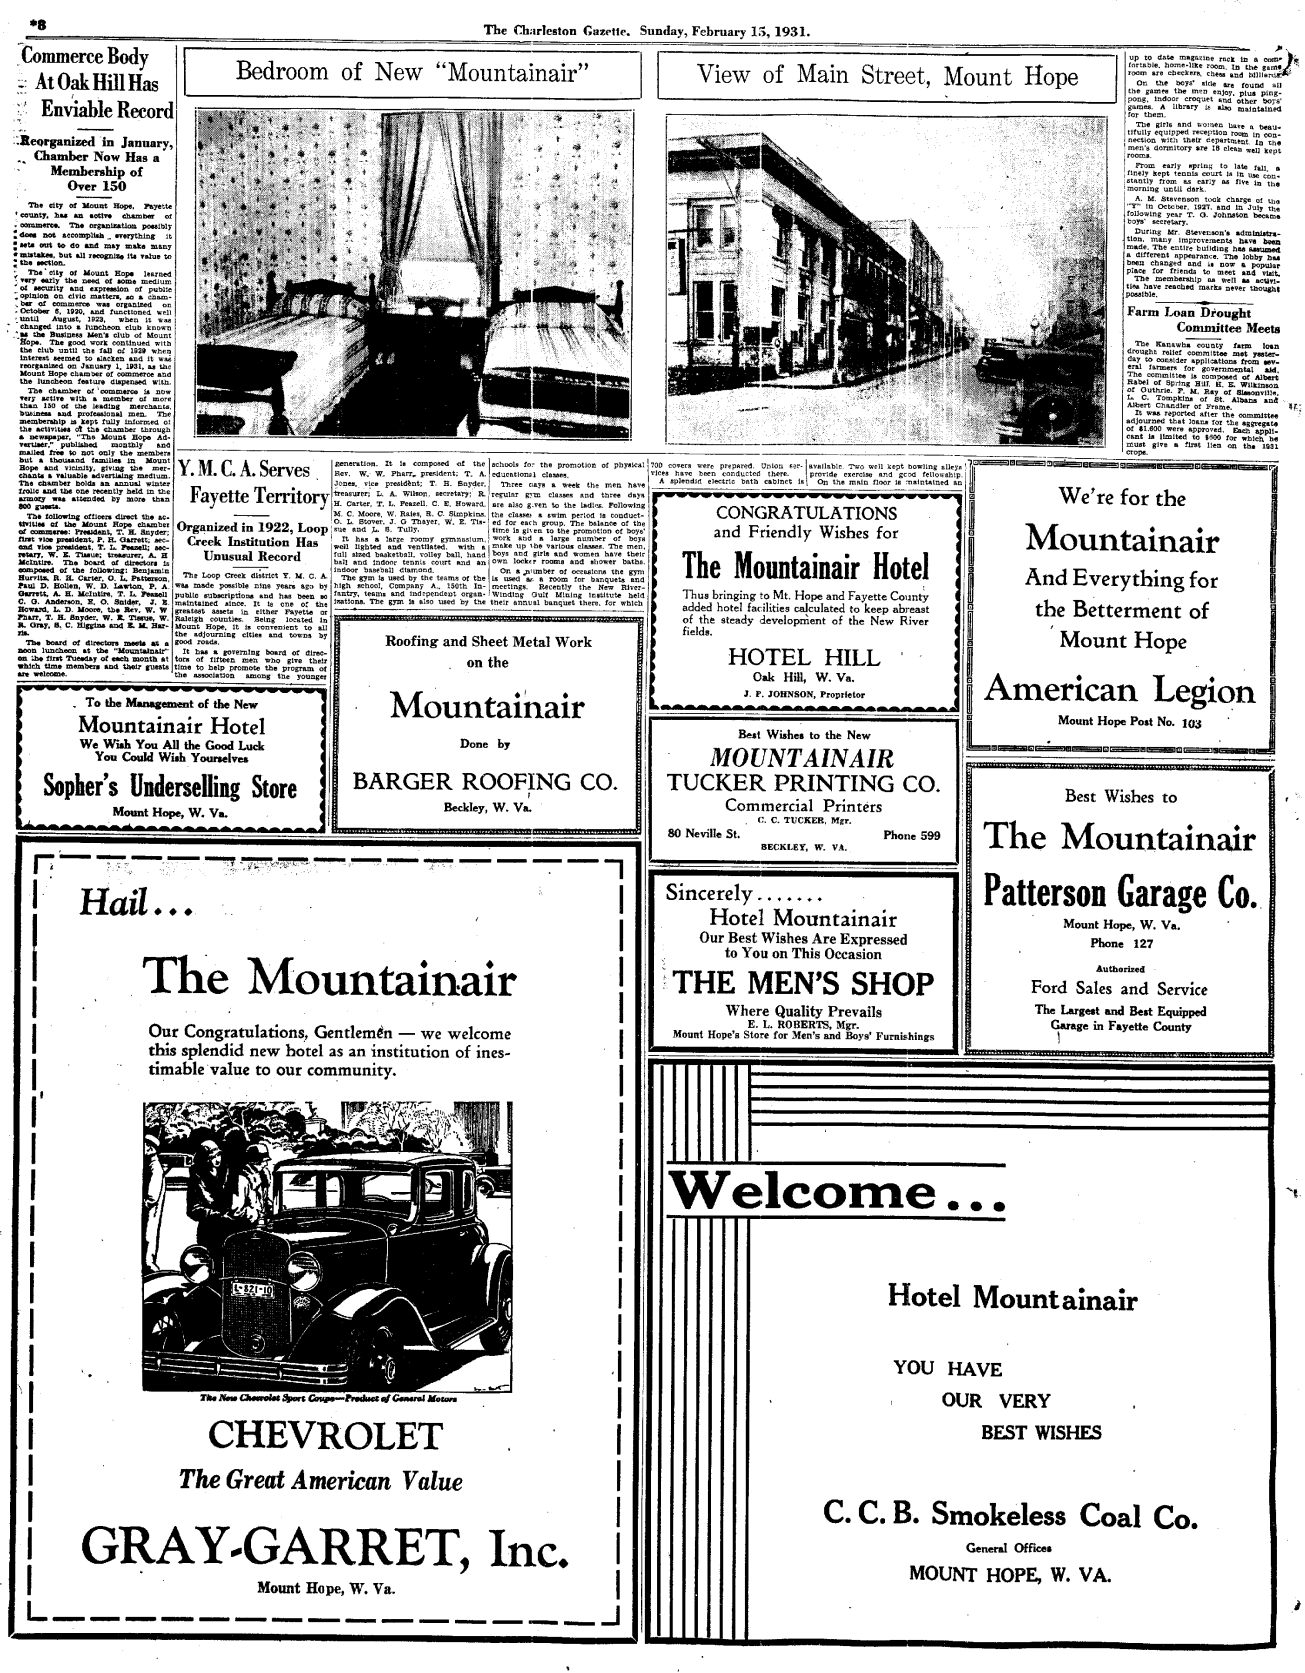 This is part of a special section of the Charleston Gazette that featured all the amenities of the town of Mount Hope offered travelers to the area.  